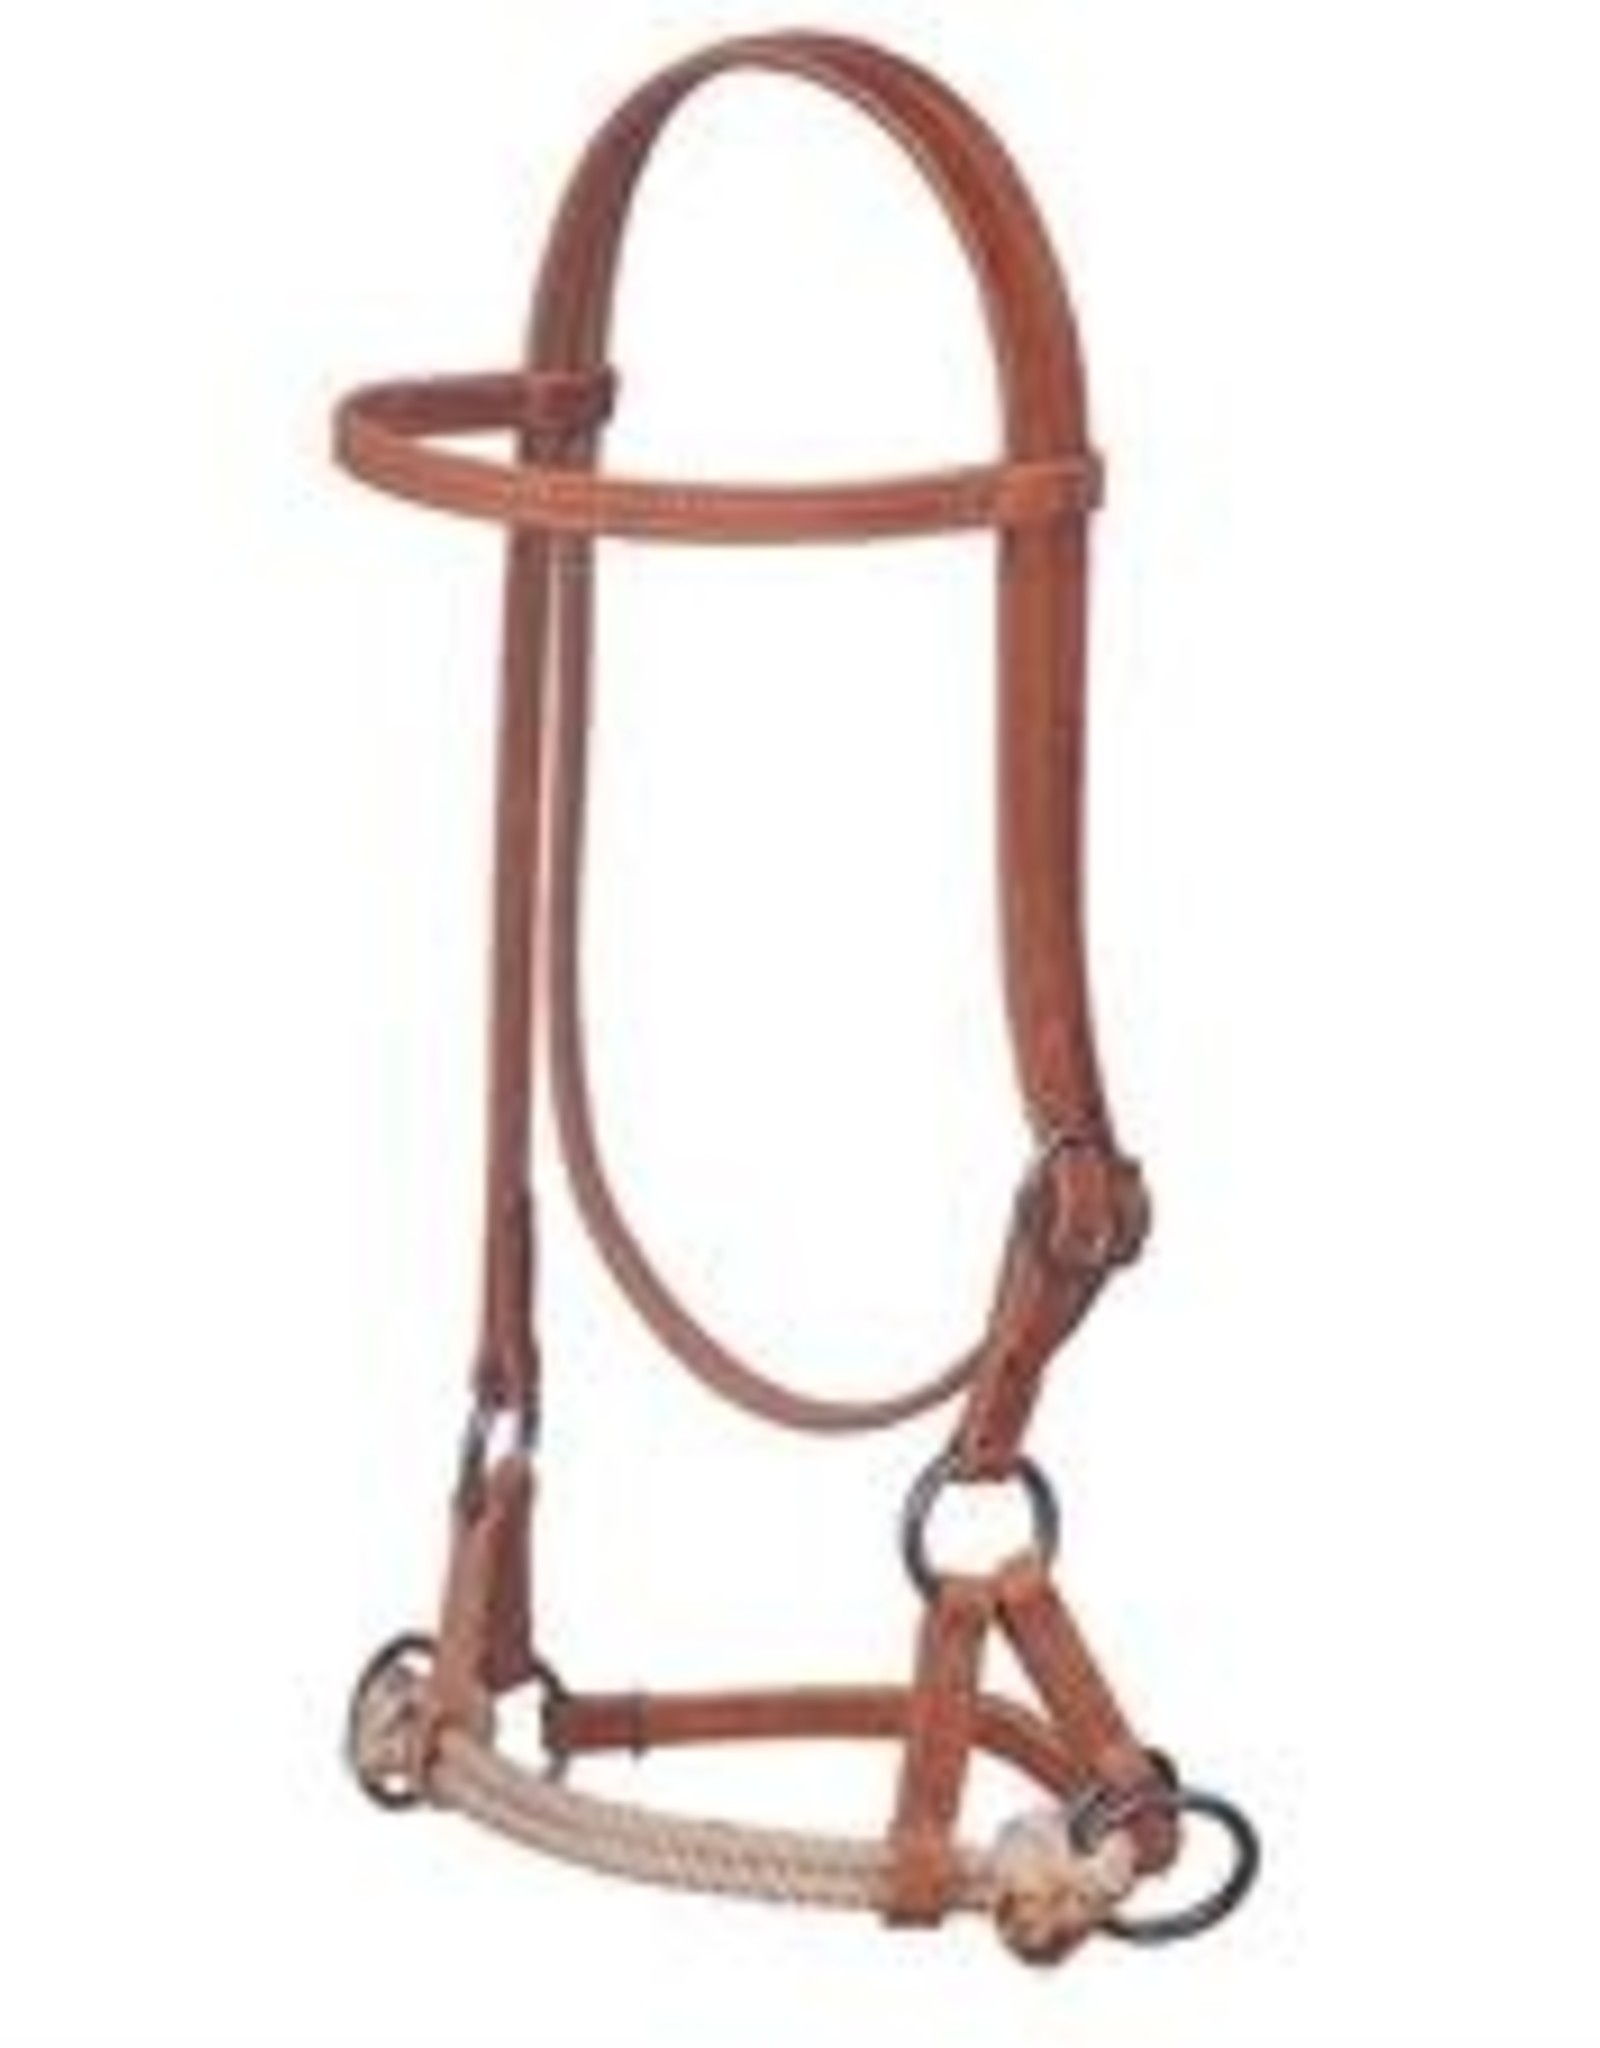 Weaver Leather Harness Leather Side Pull, Double Rope horse